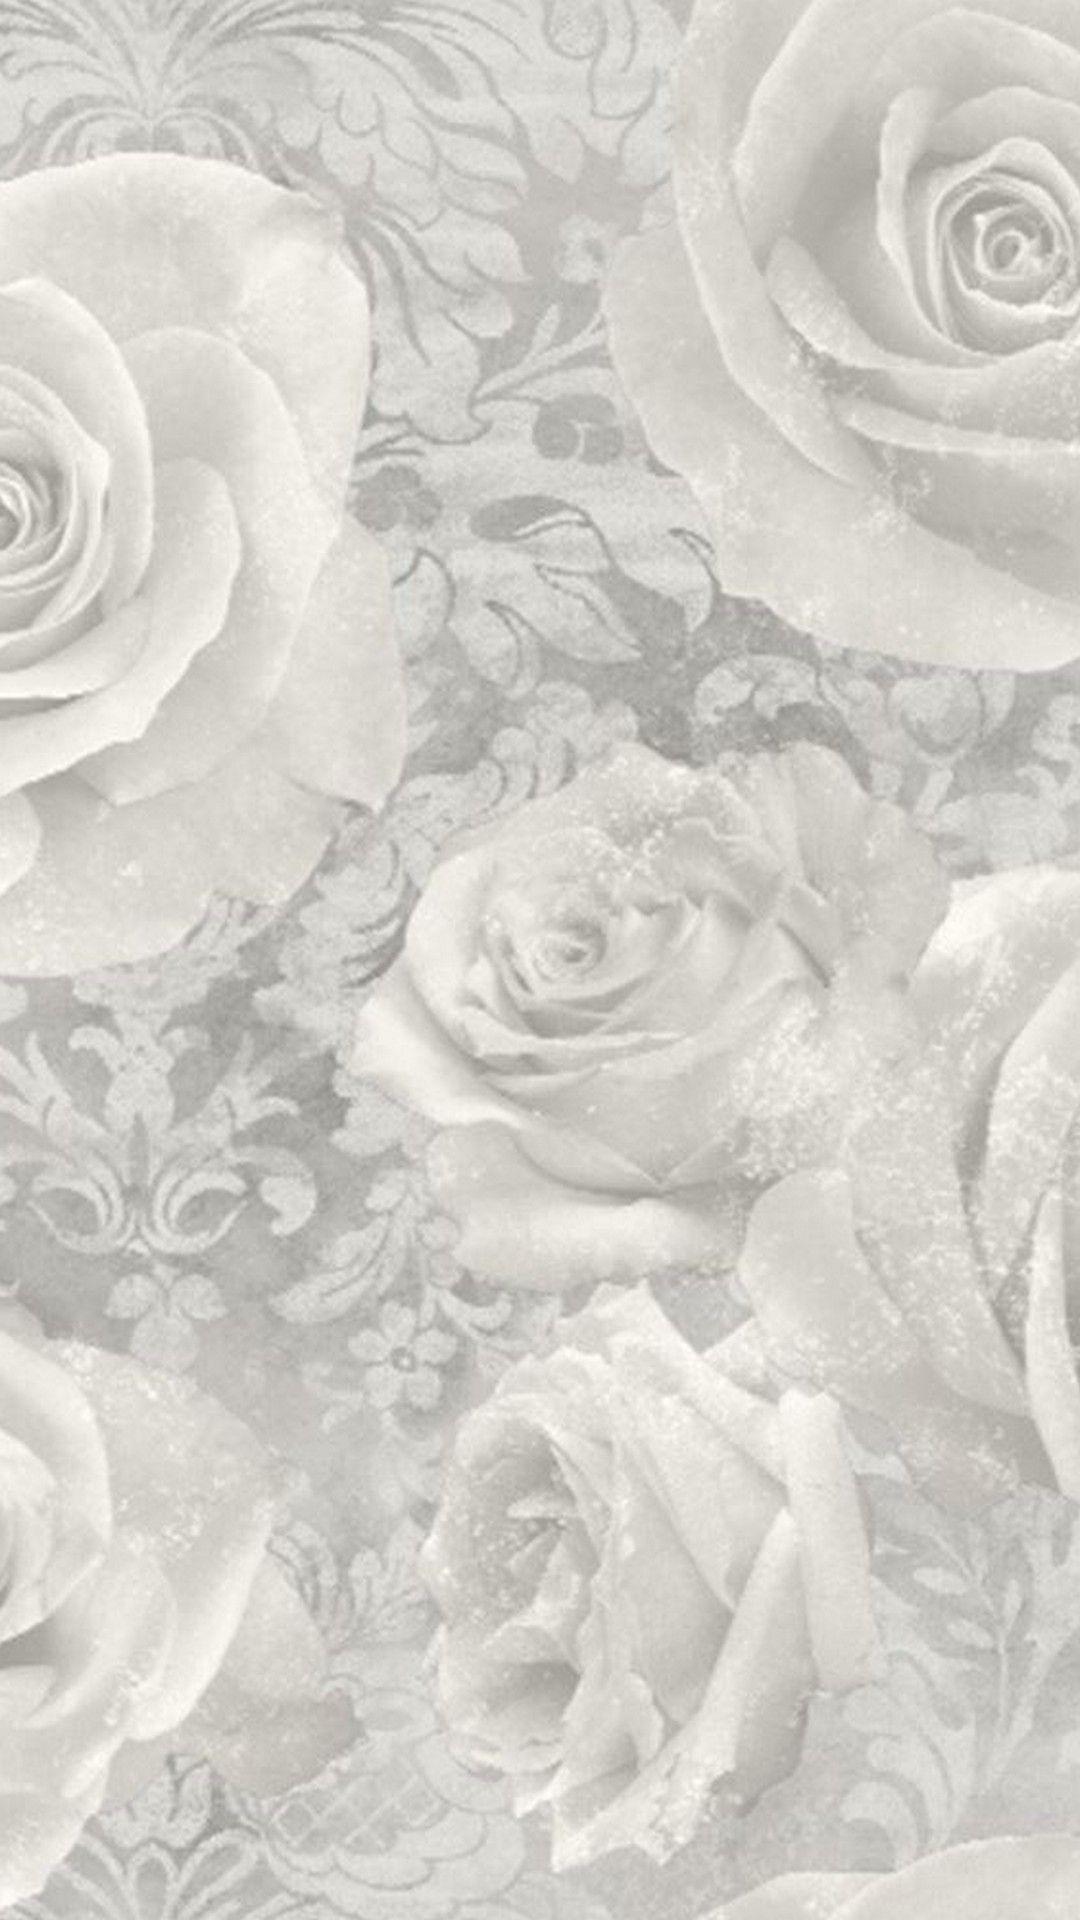 iPhone Wallpaper Black And White Rose